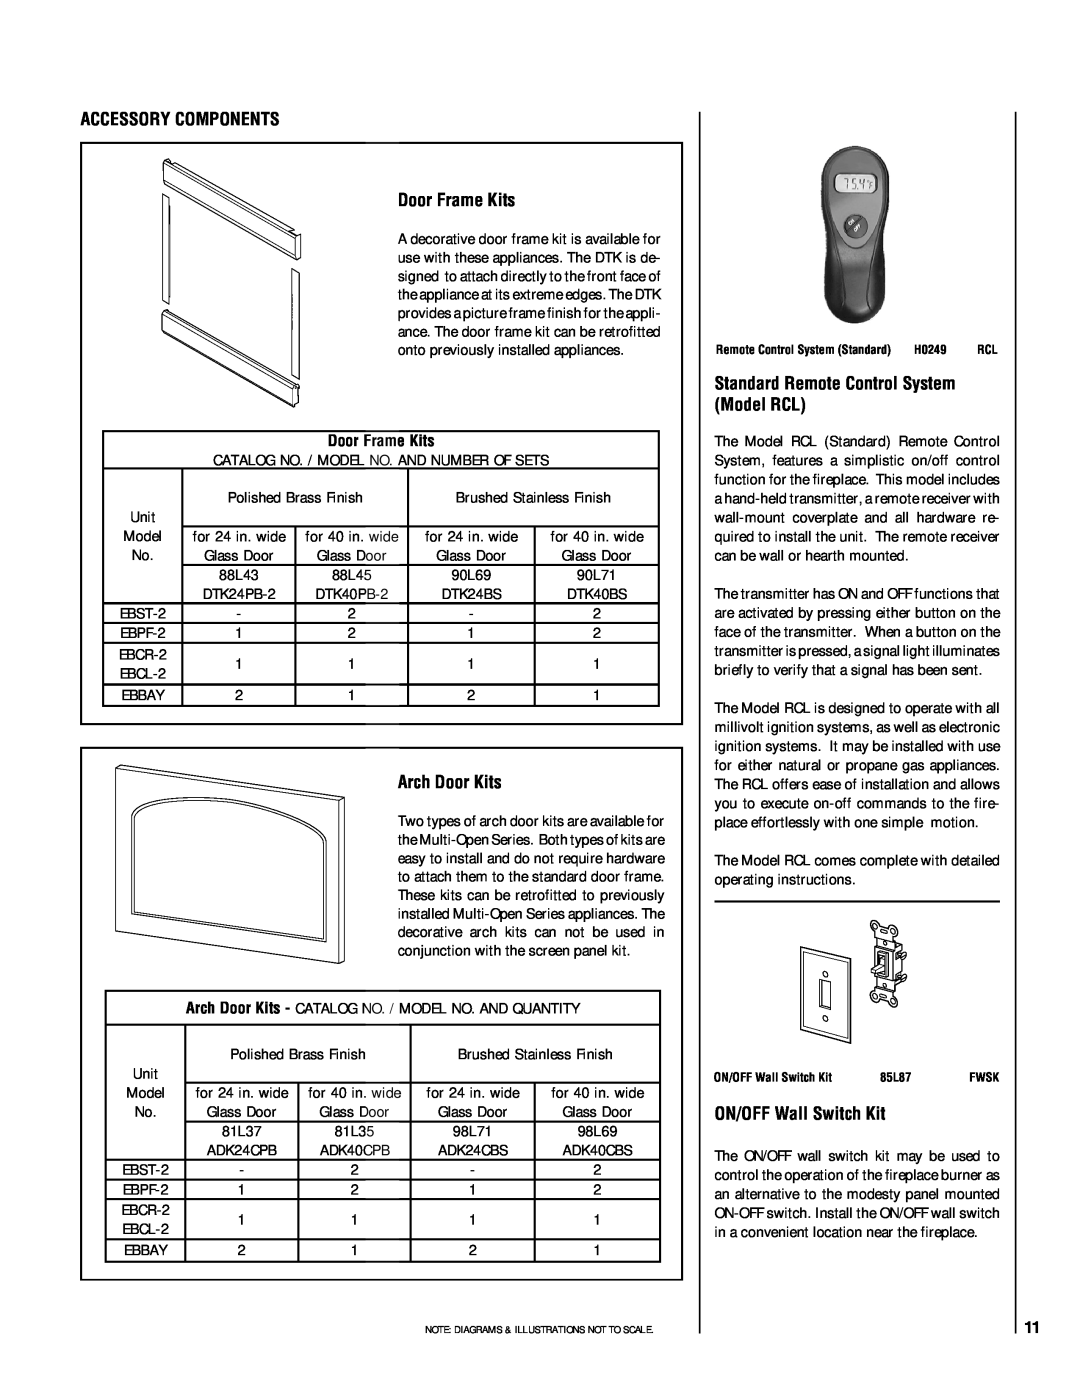 Lennox Hearth EBSTNM-2 ACCESSORY COMPONENTS Door Frame Kits, Arch Door Kits, Standard Remote Control System Model RCL 